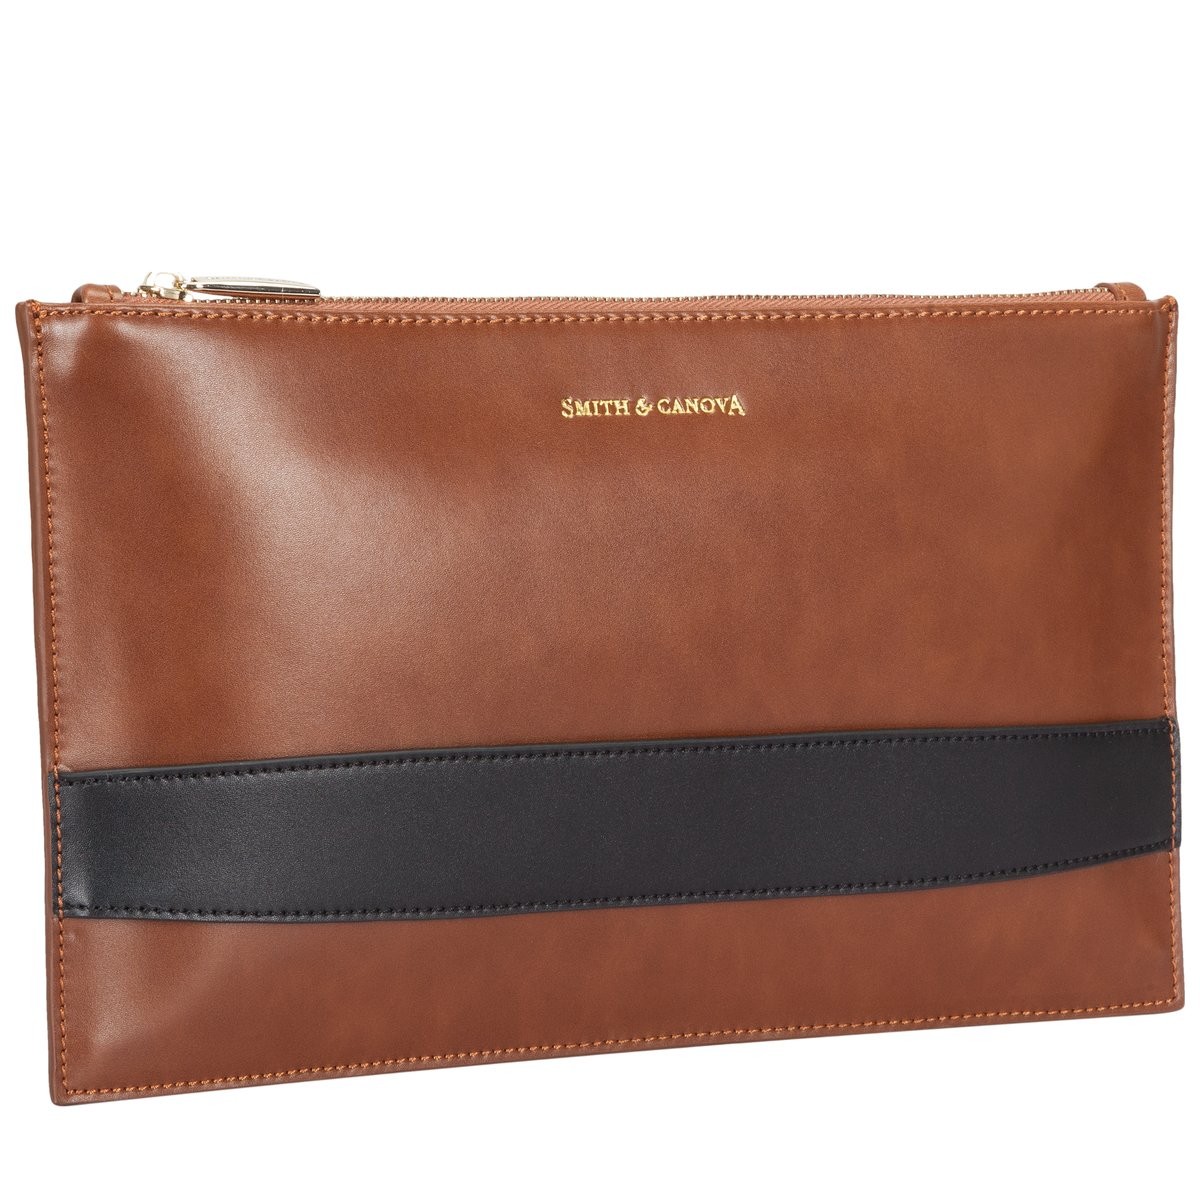 Smooth Leather Zip Top Clutch Bag - Smith & Canova